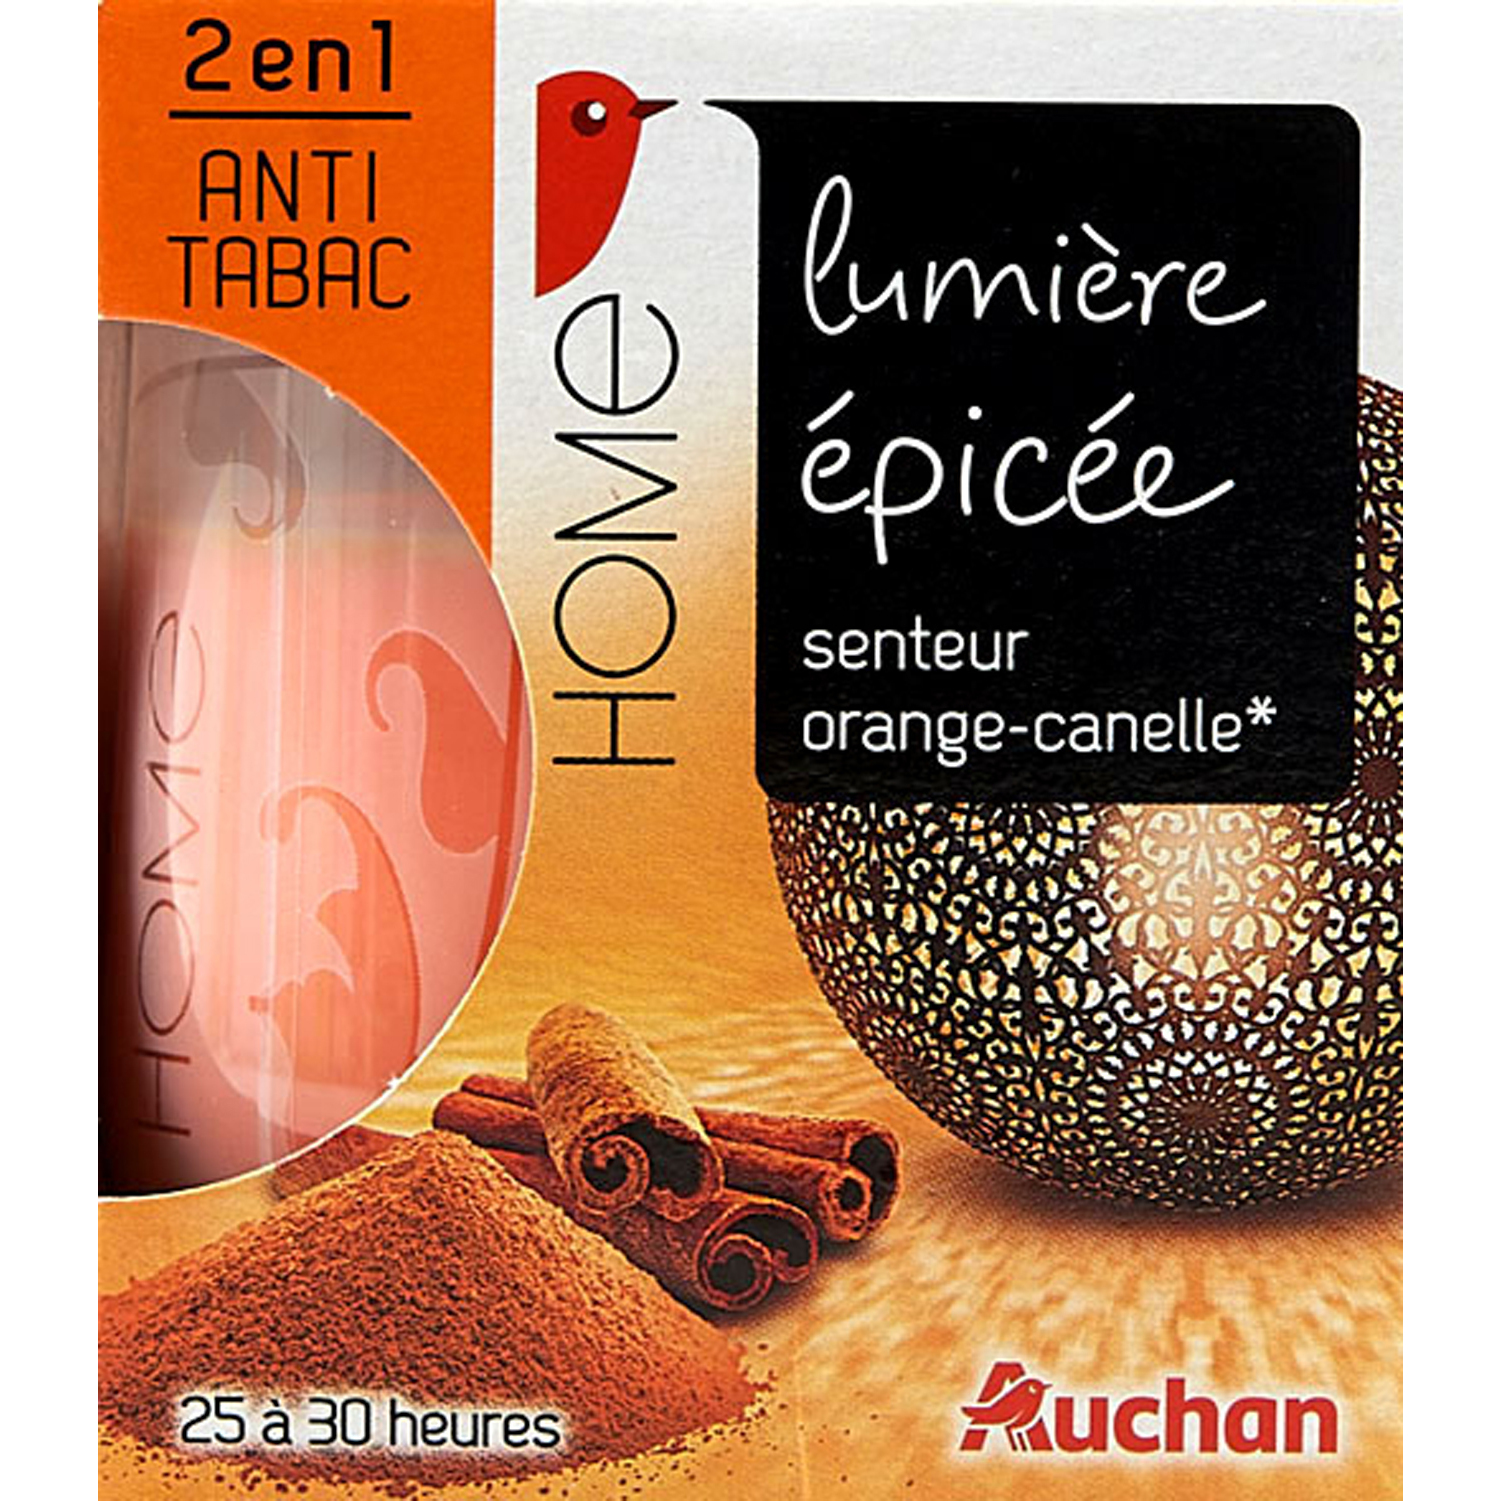 Une bougie anti-tabac